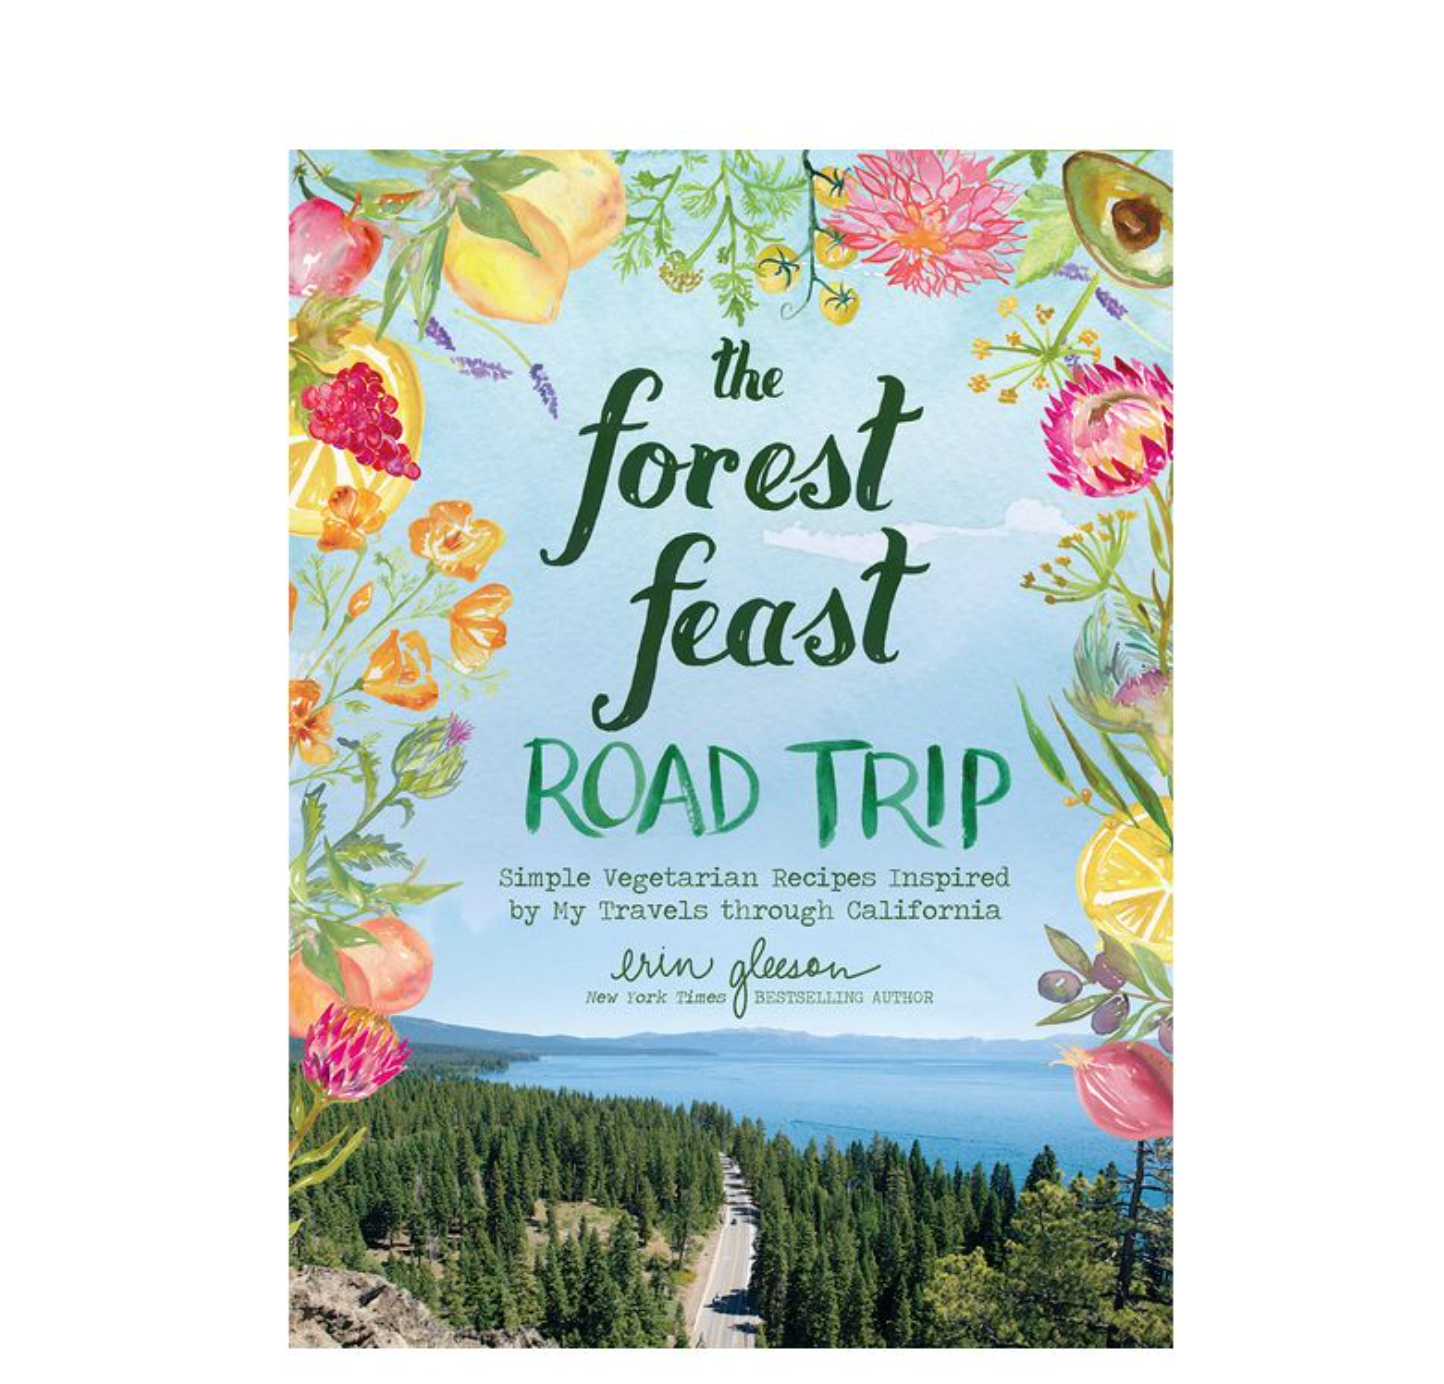 The Forest Feast Road Trip:  Simple Vegetarian Recipes Inspired by My Travels through California